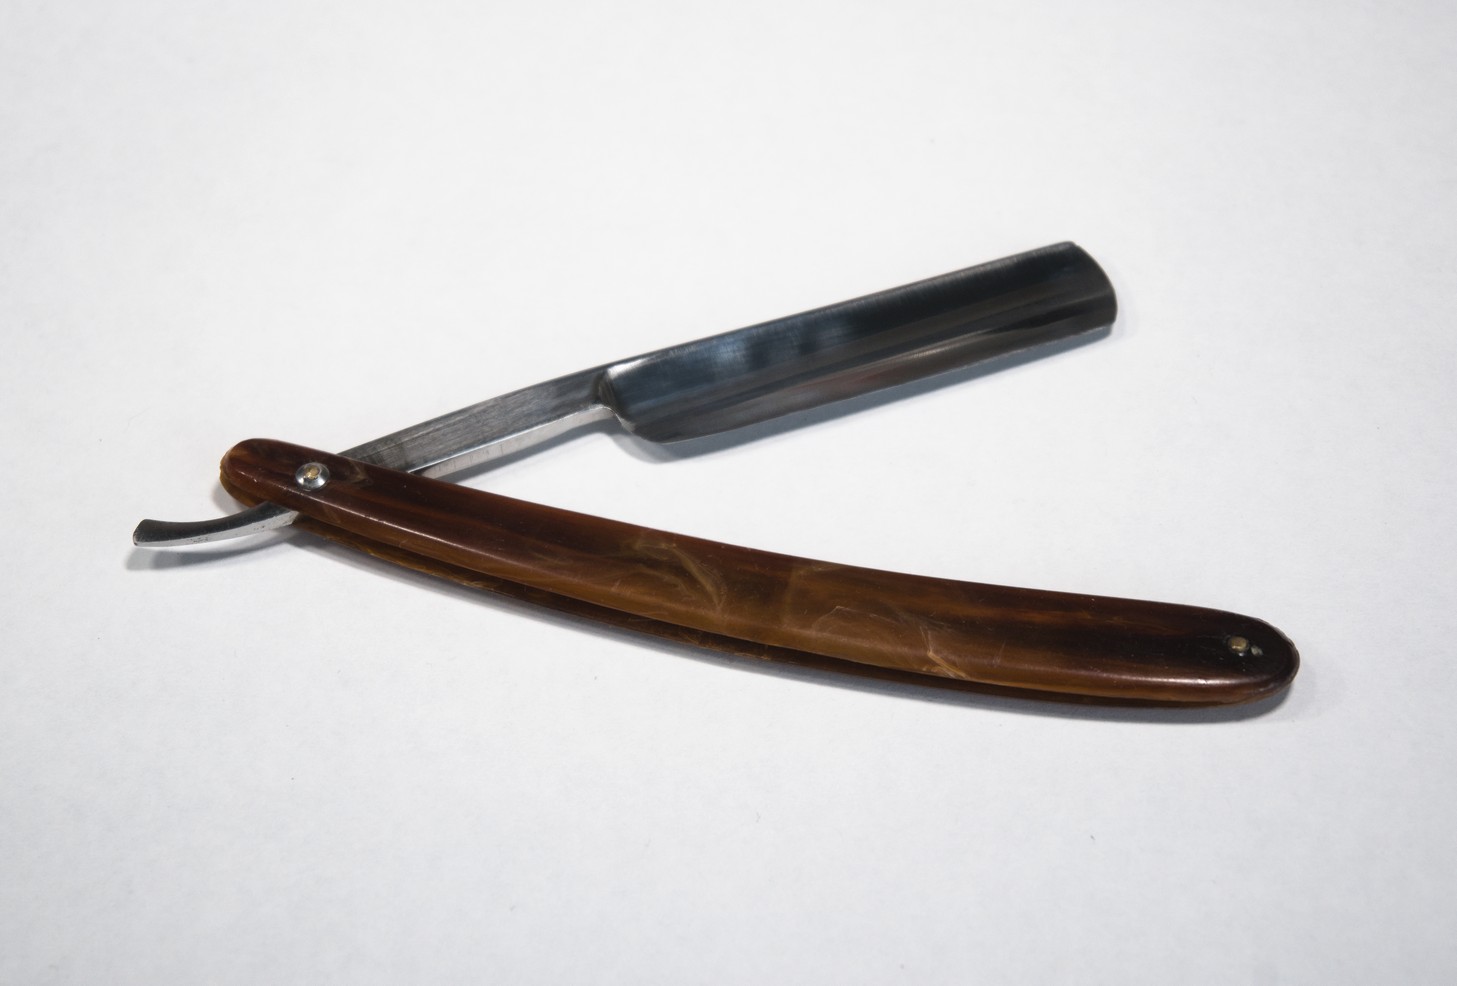 A straight razor slightly unfolded to show the cutting edge.